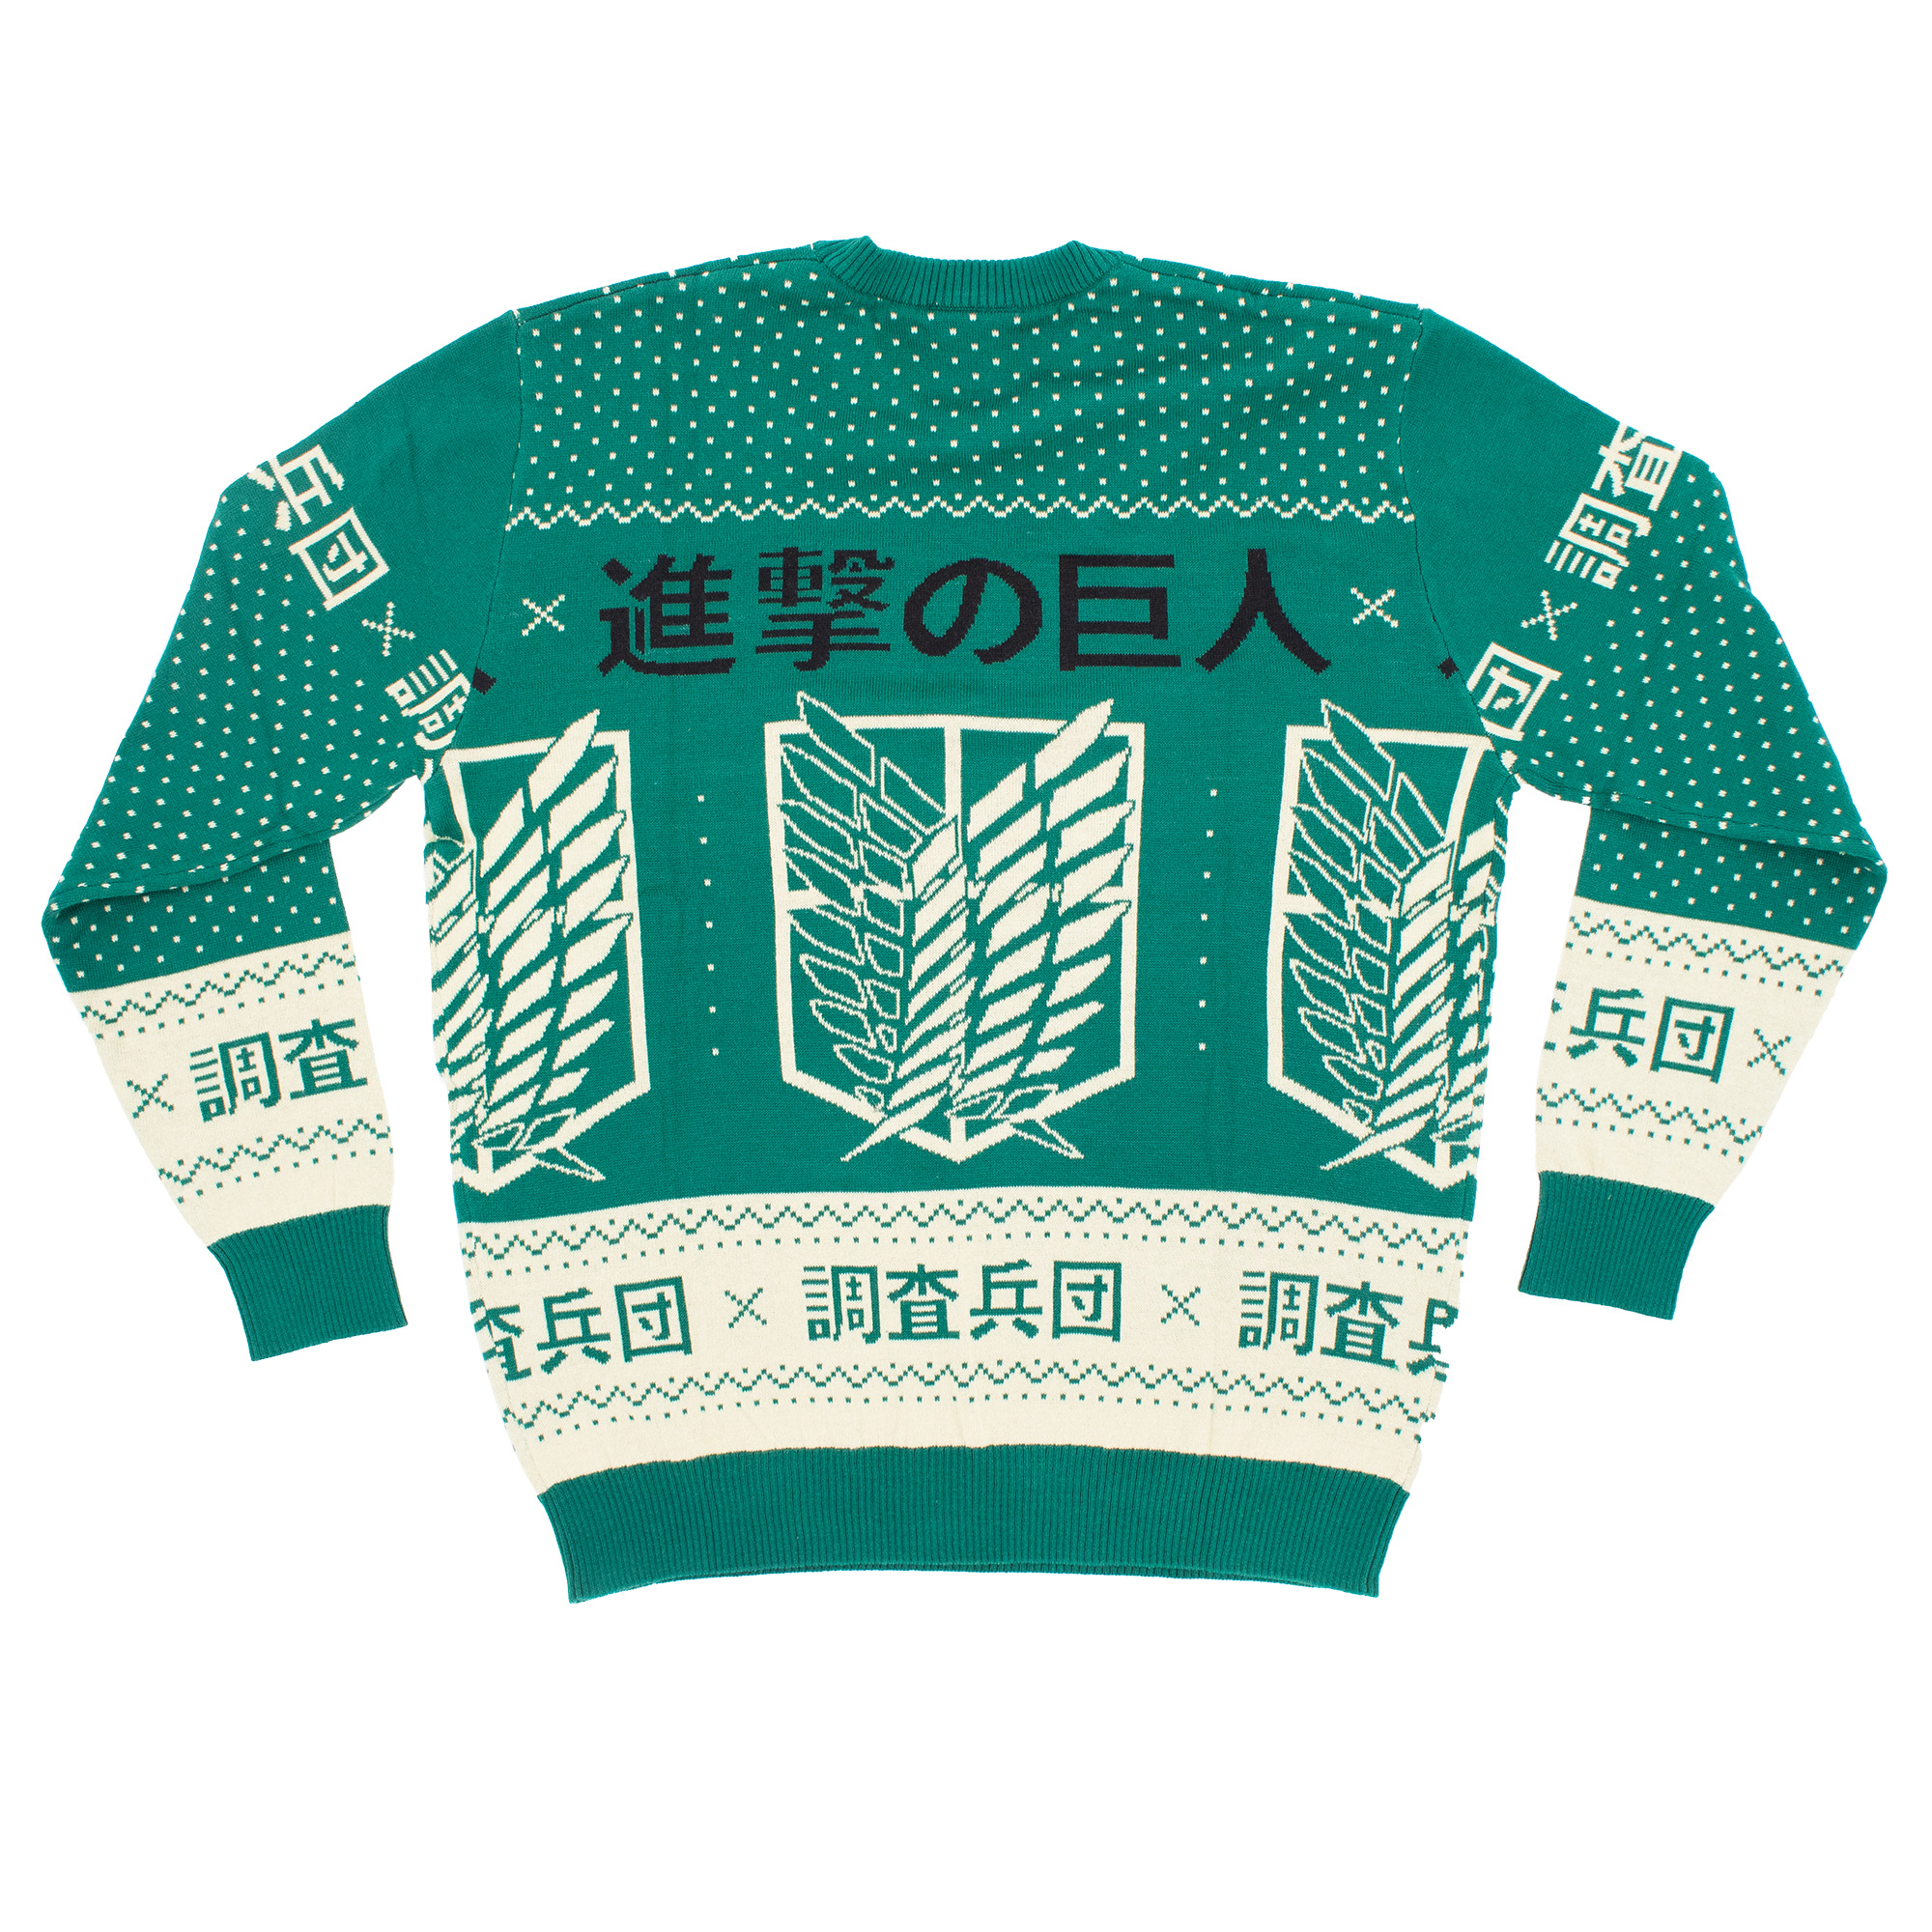 Attack on Titan - Scout Regiment Kanji Holiday Sweater - Crunchyroll Exclusive! image count 1